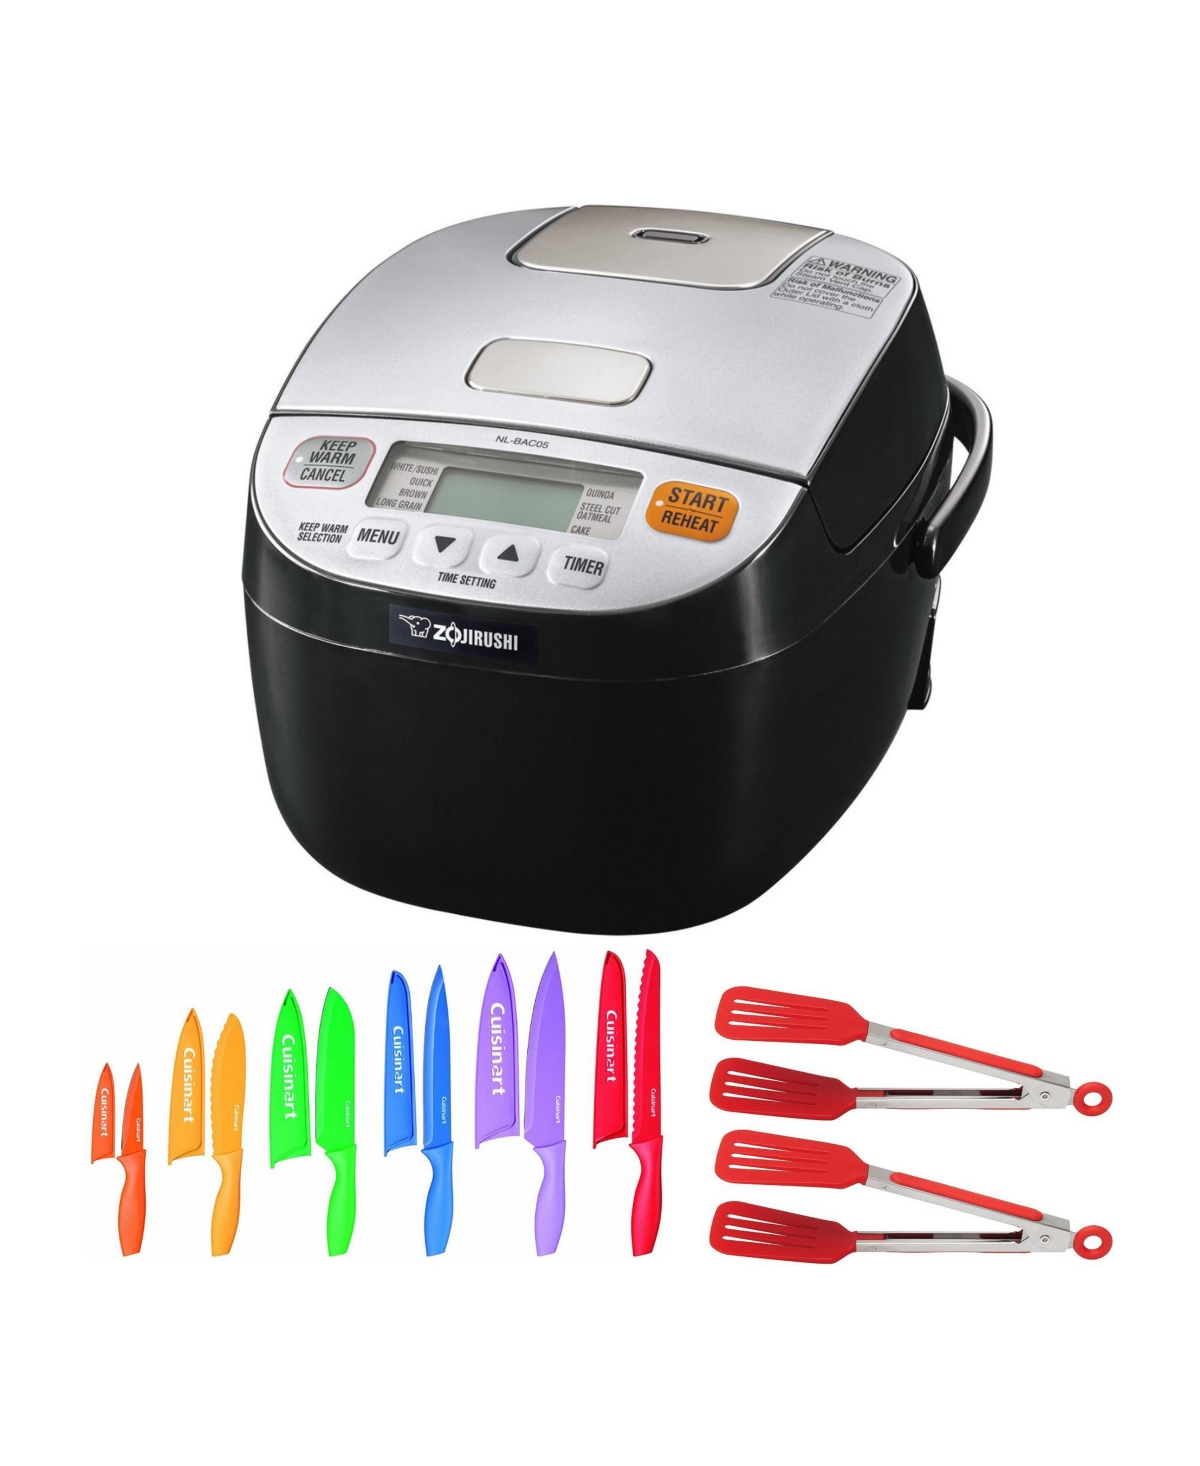 Micom Rice Cooker and Warmer with Color Chef Knife Set and Nylon Tongs - Black